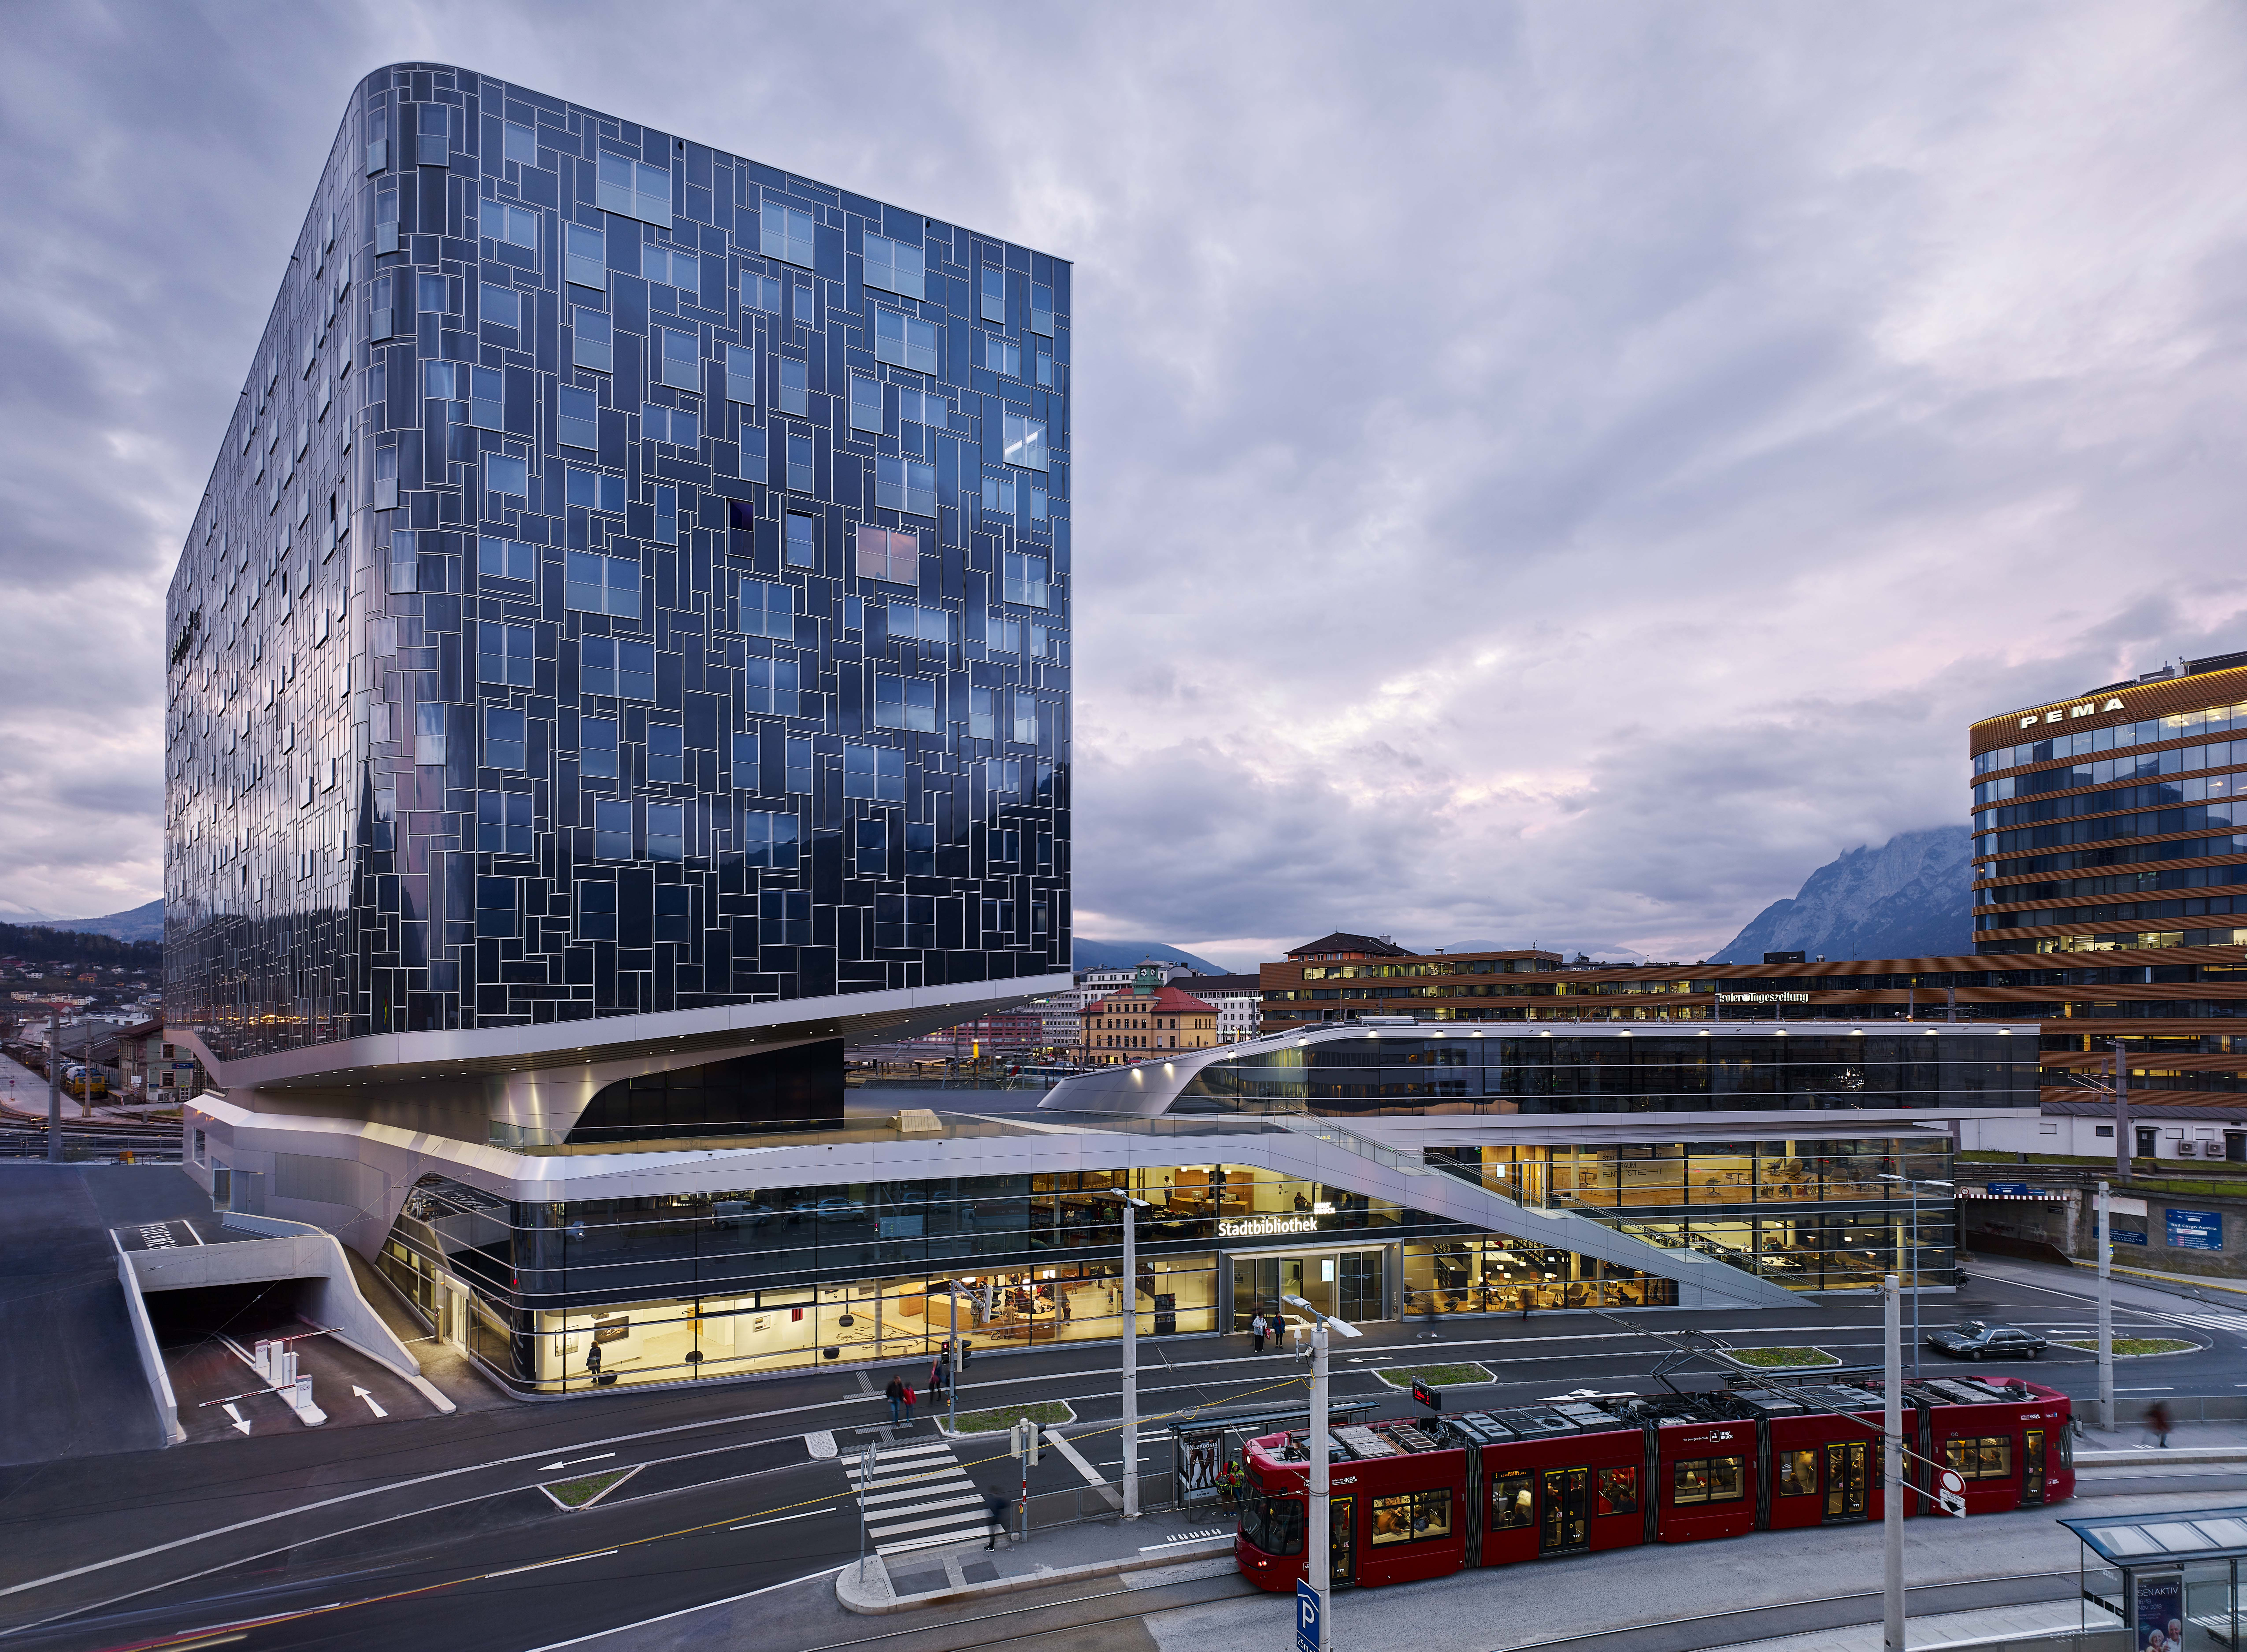 The completed tower of PEMA 2 near Innsbruck Hauptbahnhof. Source: Marc Lins Photography